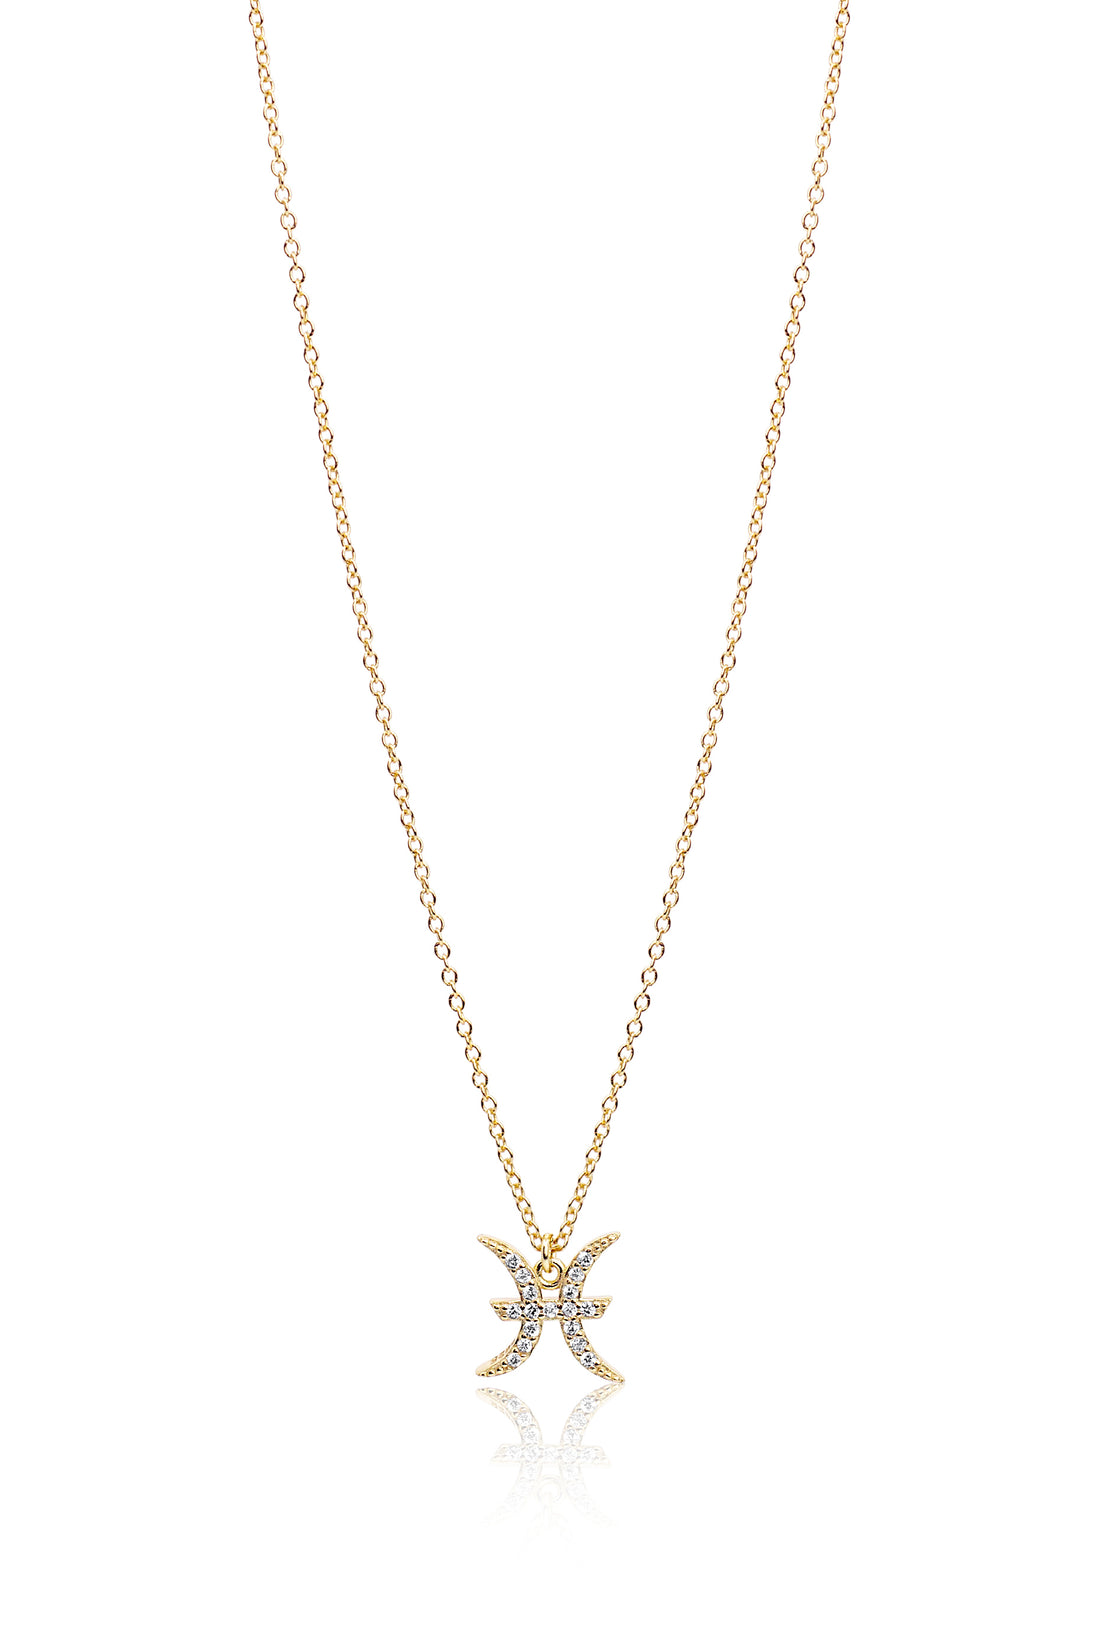 The Star Sign Necklaces